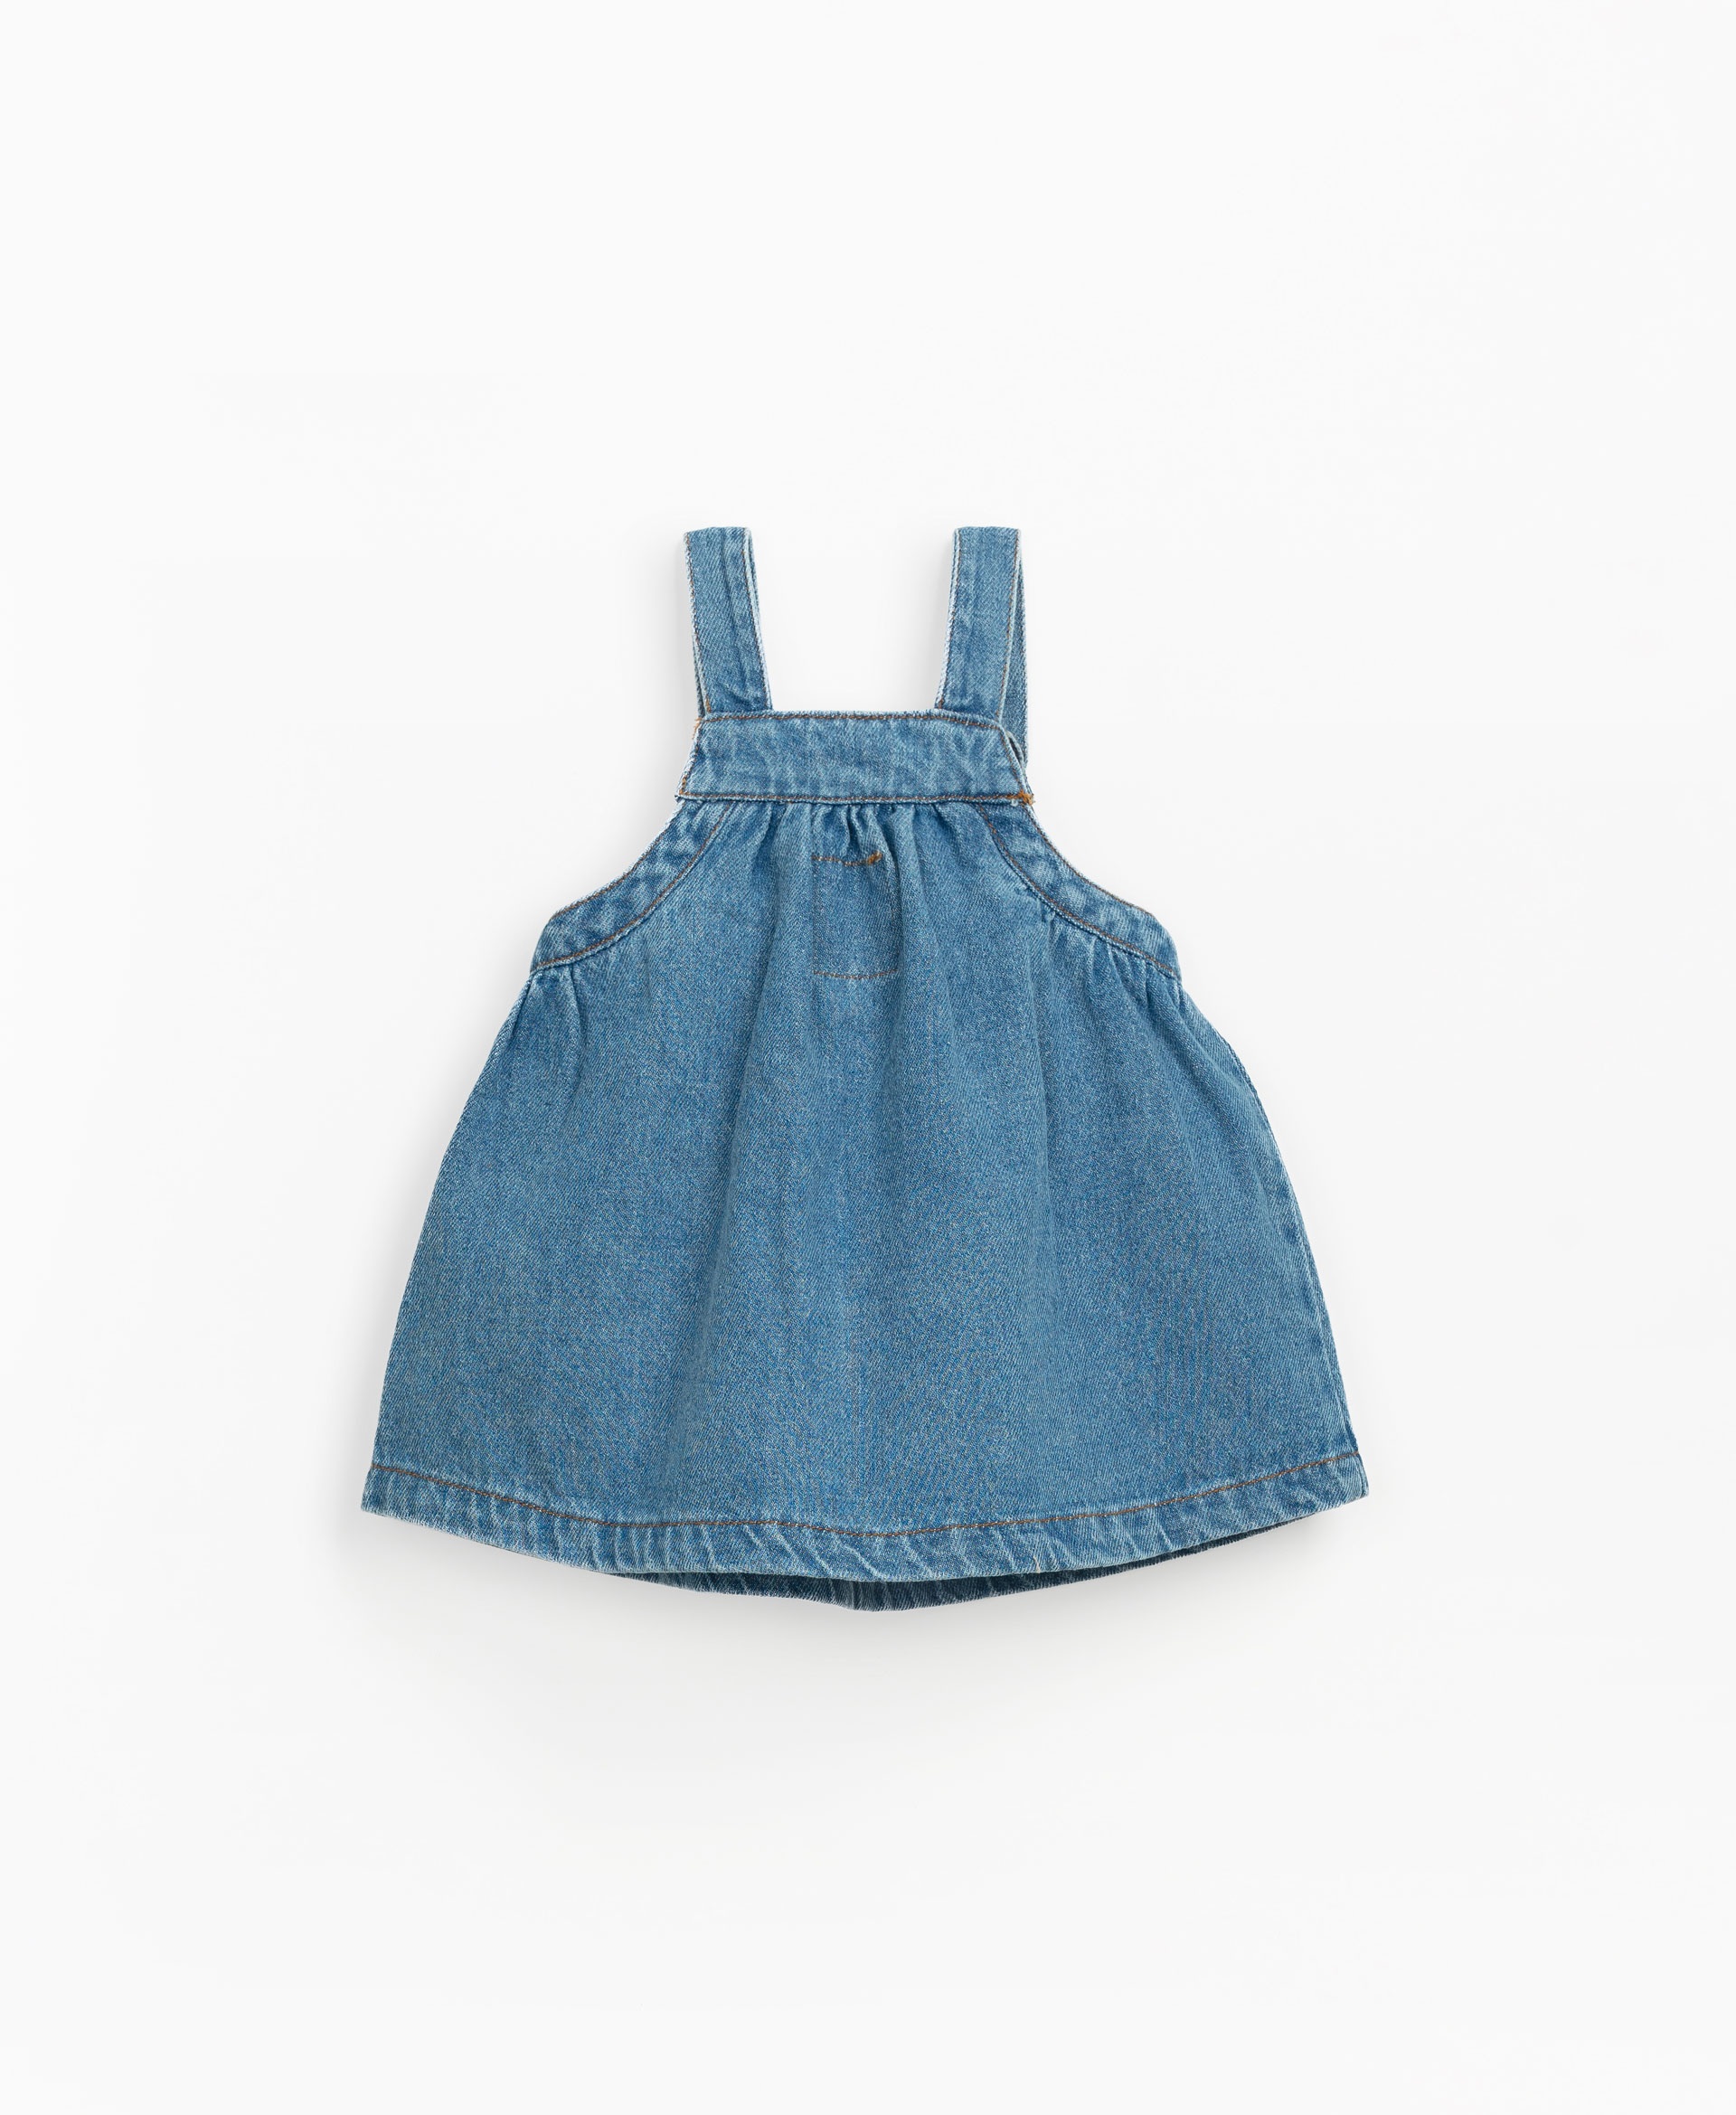 18 Months: Apple Tree Embroidered Denim Overall Jumper Dress, Pockets, by  Hartstrings Baby - Etsy